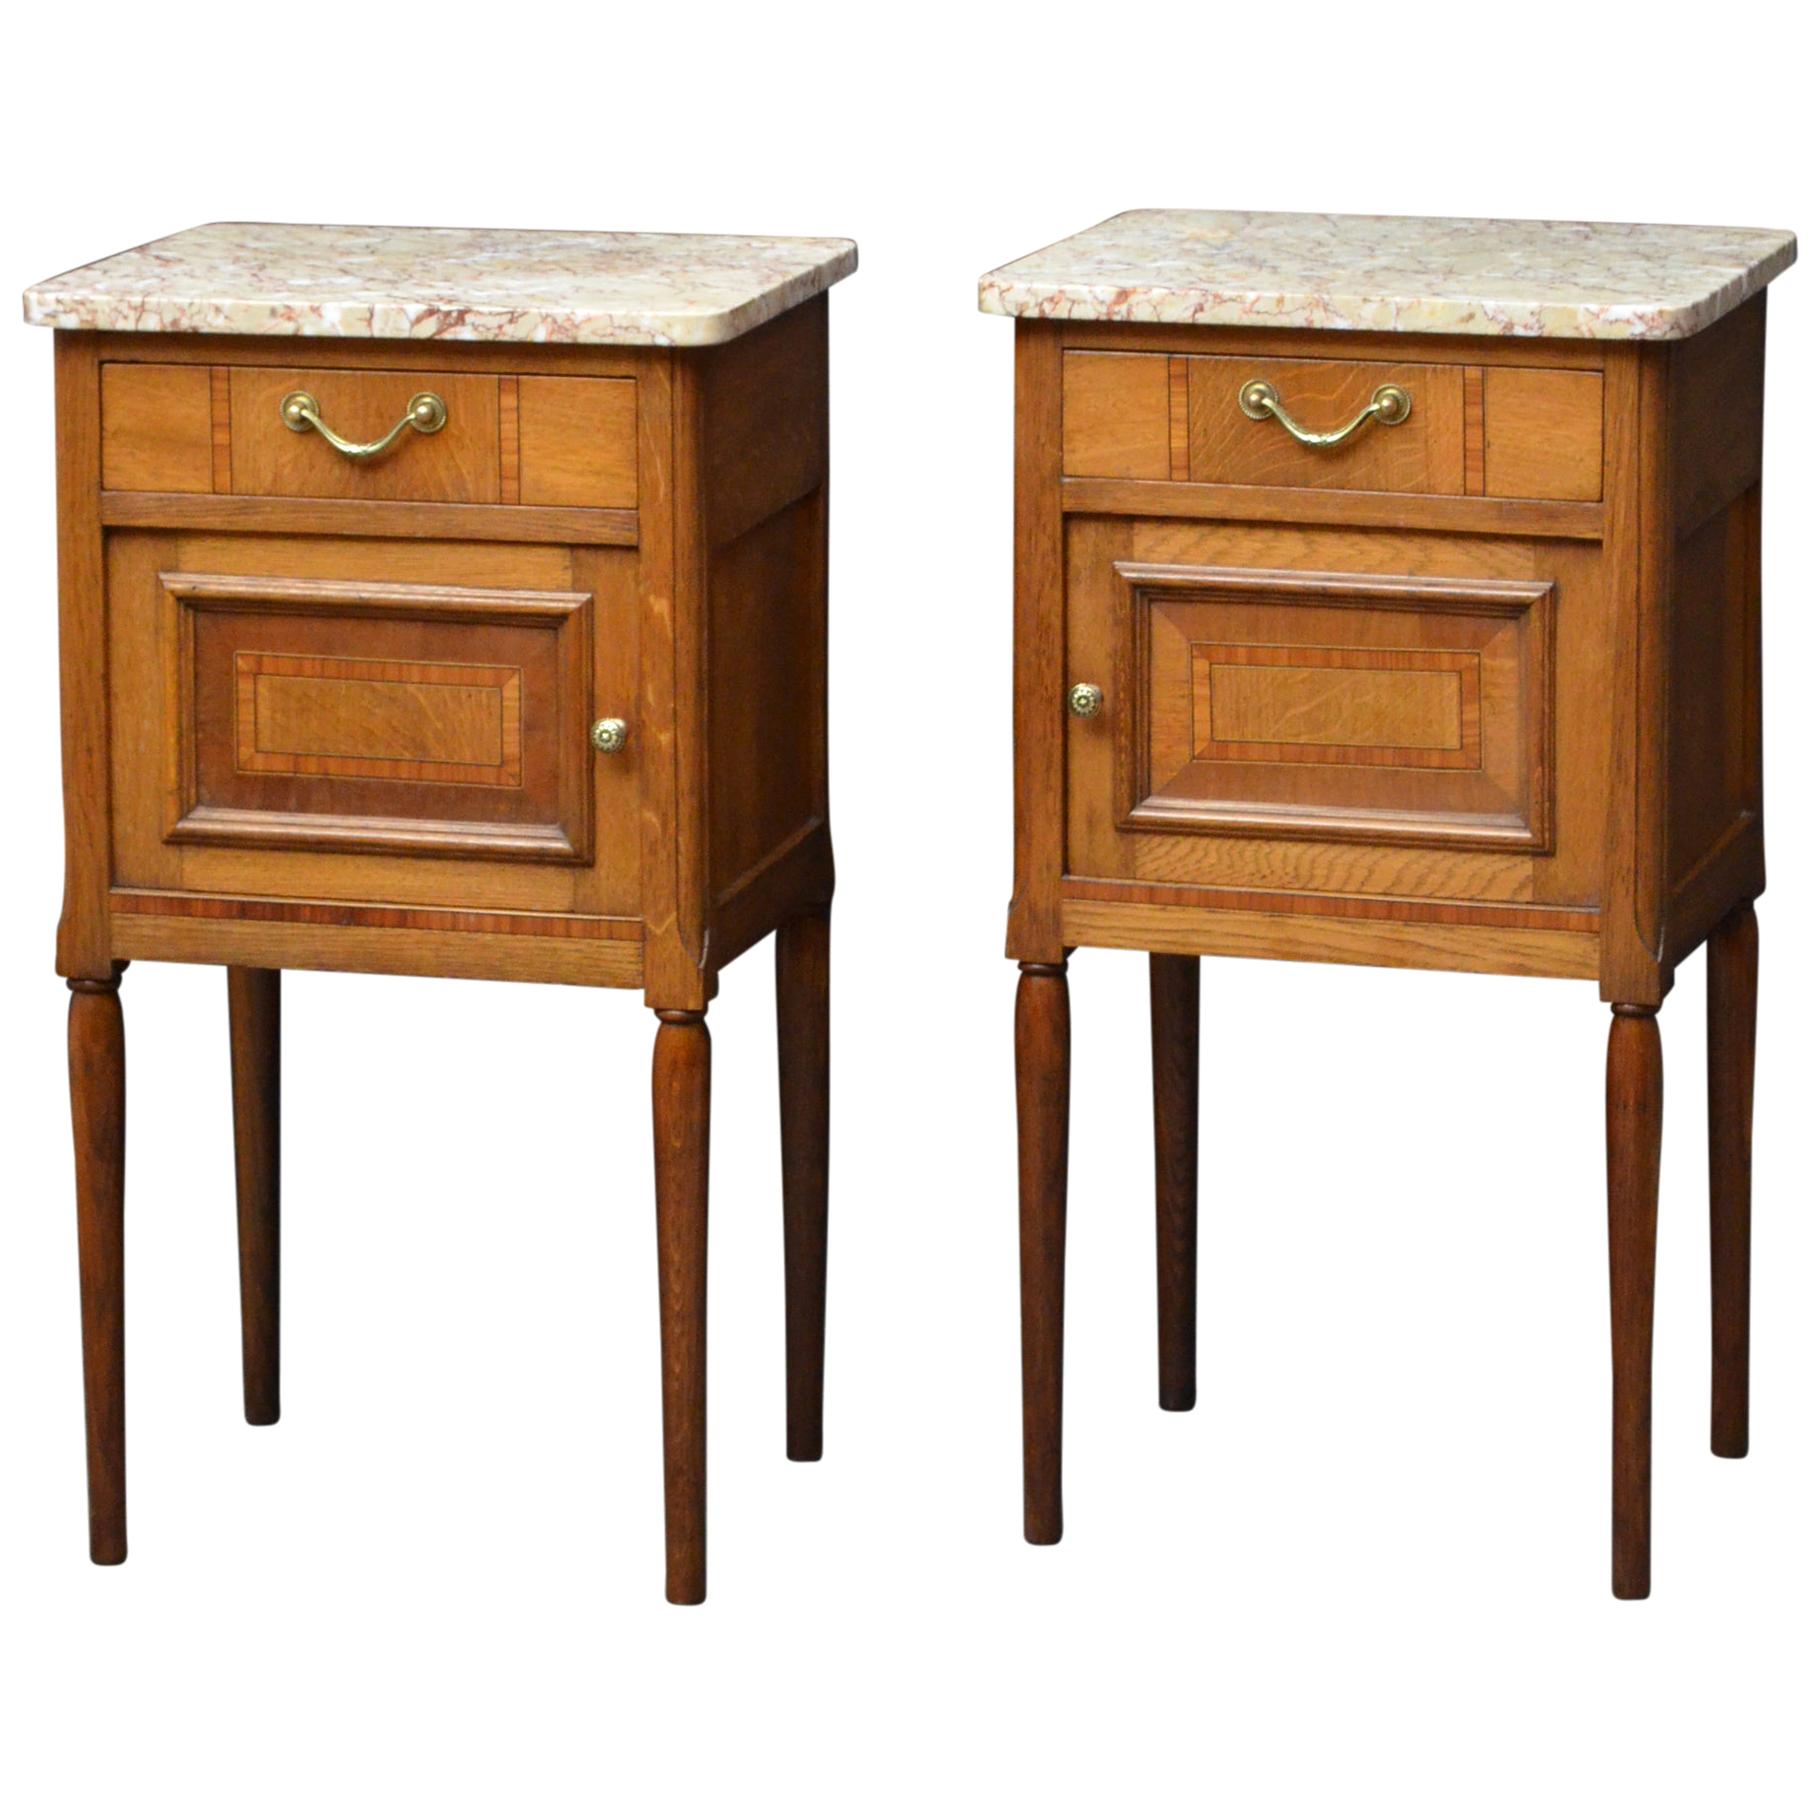 Pair of Turn of the Century Bedside Cabinets in Oak